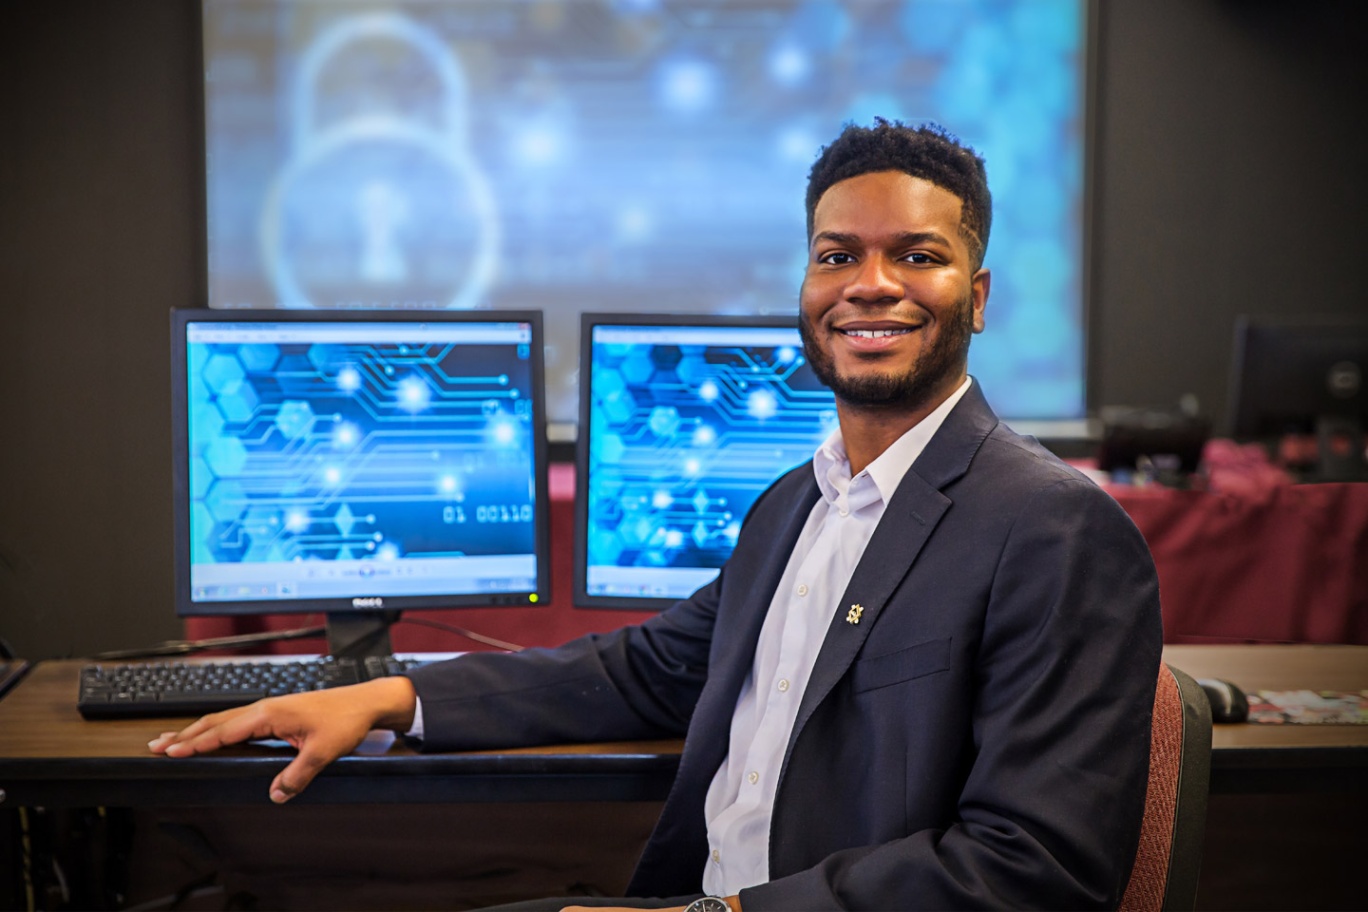 Level Up Your Tech Skills With A Cybersecurity Bachelor’s Degree